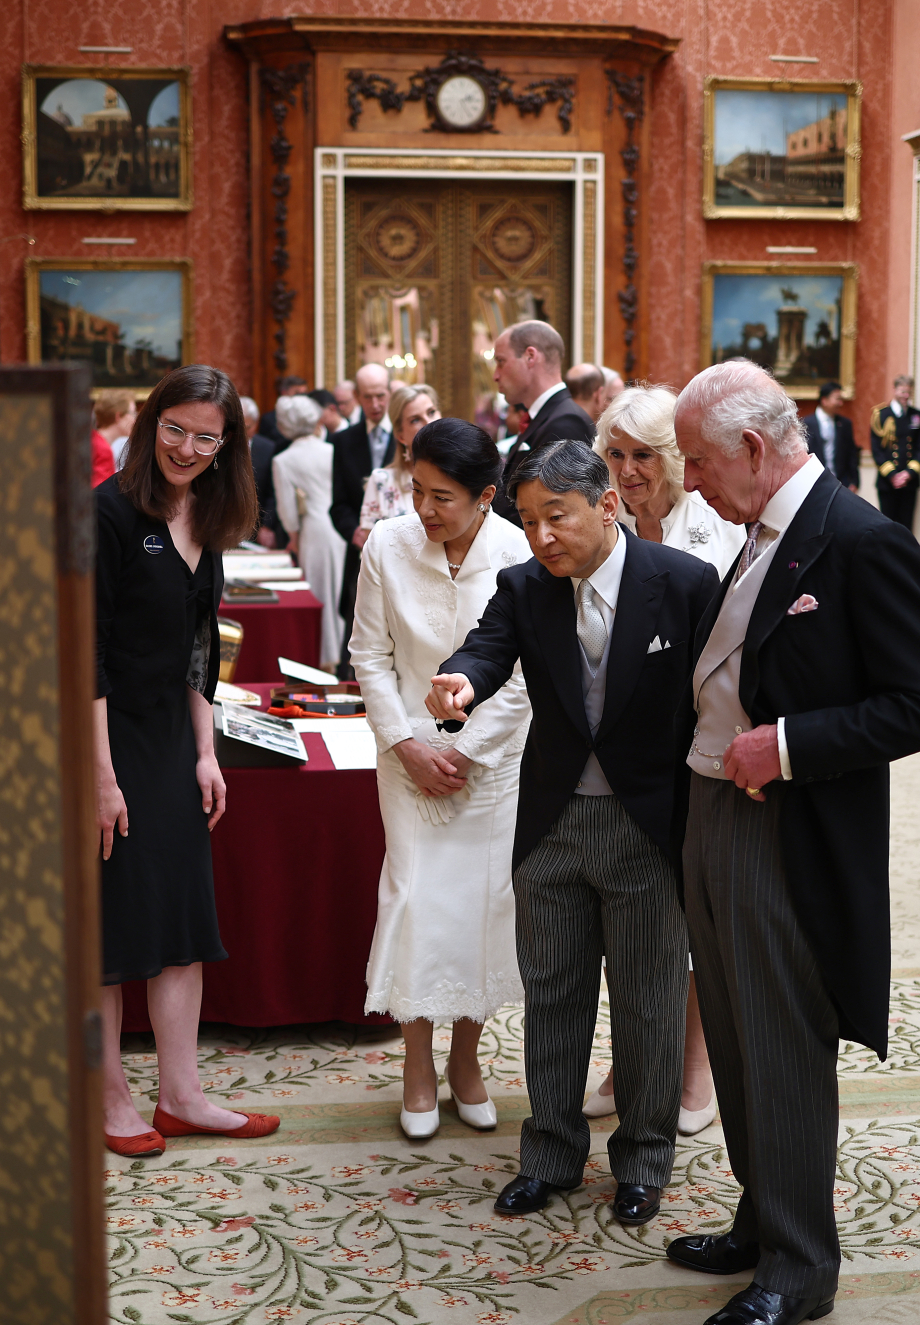 King Charles III and Queen Camilla with Emperor Naruhito and his wife Empress Masako of Japan, view a display of Japanese items from the Royal Collection at Buckingham Palace